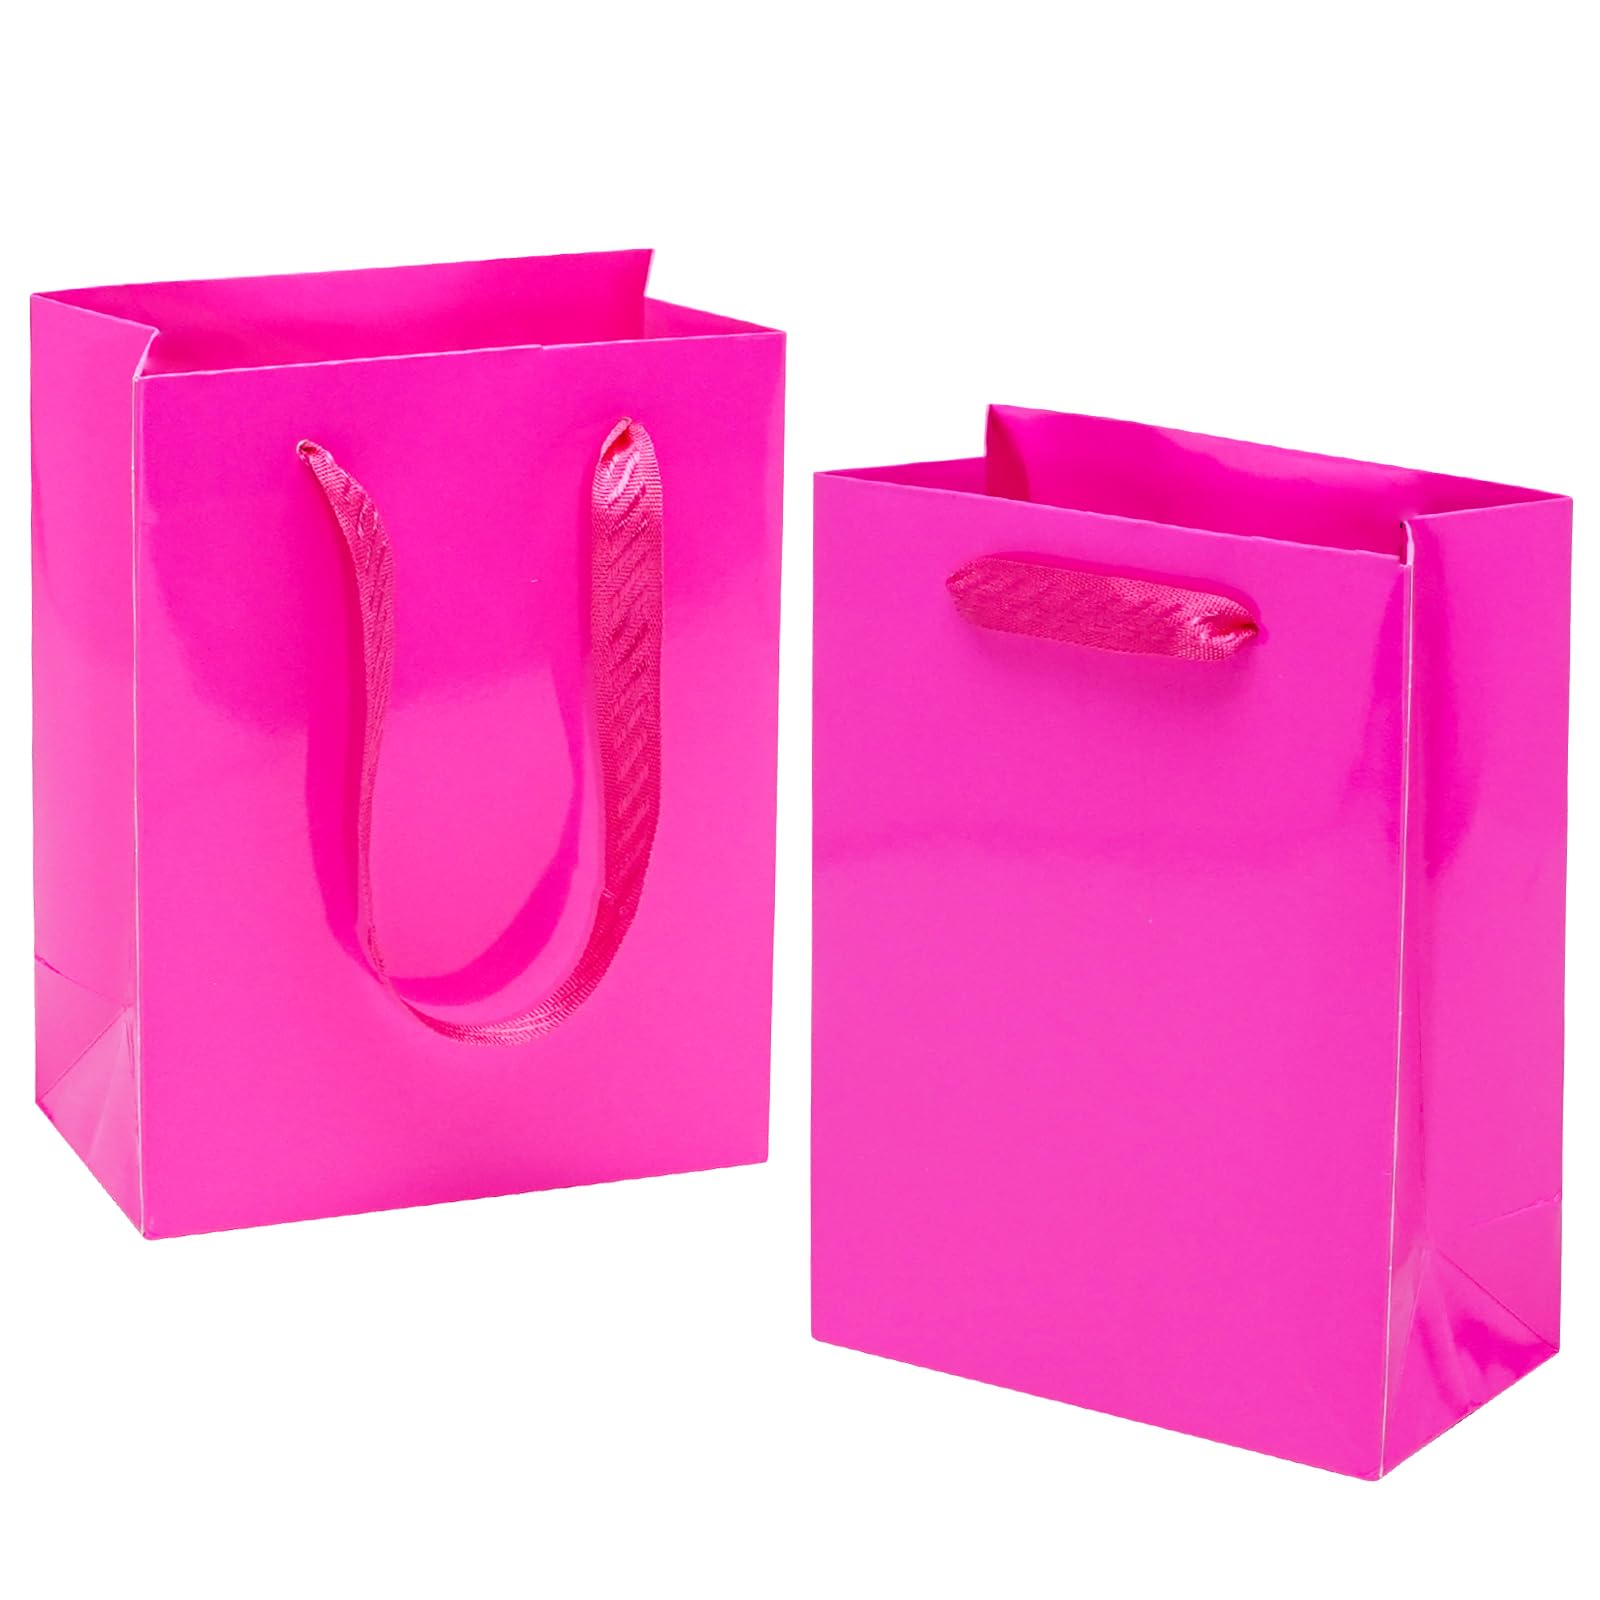 UnicoPak 30 Pcs Hot Pink Gift Bags Small Size 6x3.2x8 Inch, Glossy Finish Surface Paper Gift Bags with Handles, Small Goodie Bags Party Favor Bags Candy Bags for Barbie Themed Birthday, Party,